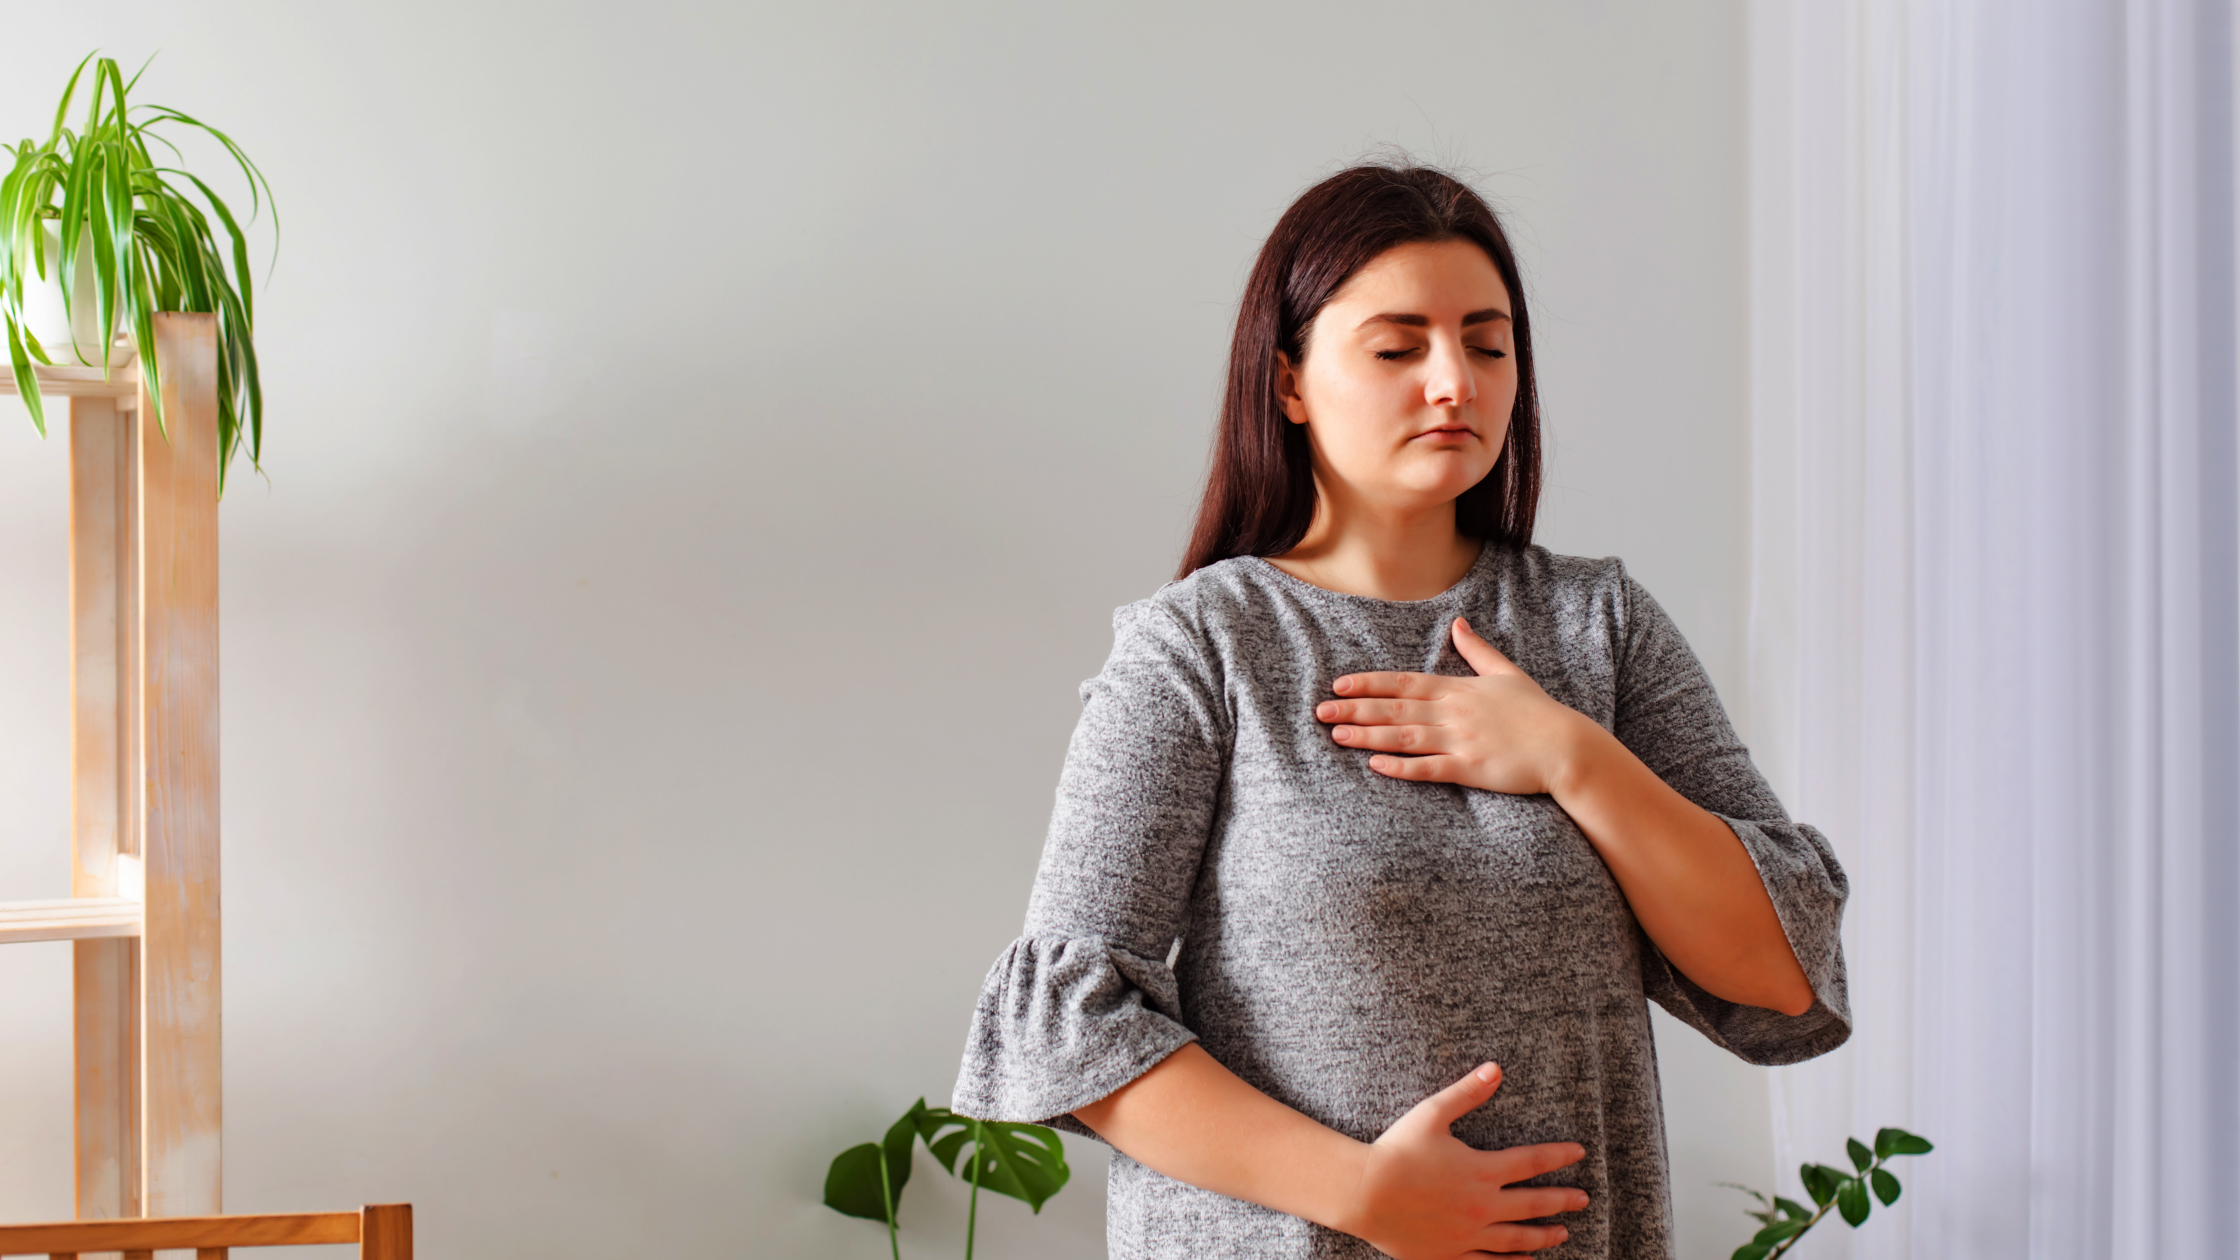 Take a Deep Breath – Connect with Your Pelvic Floor!